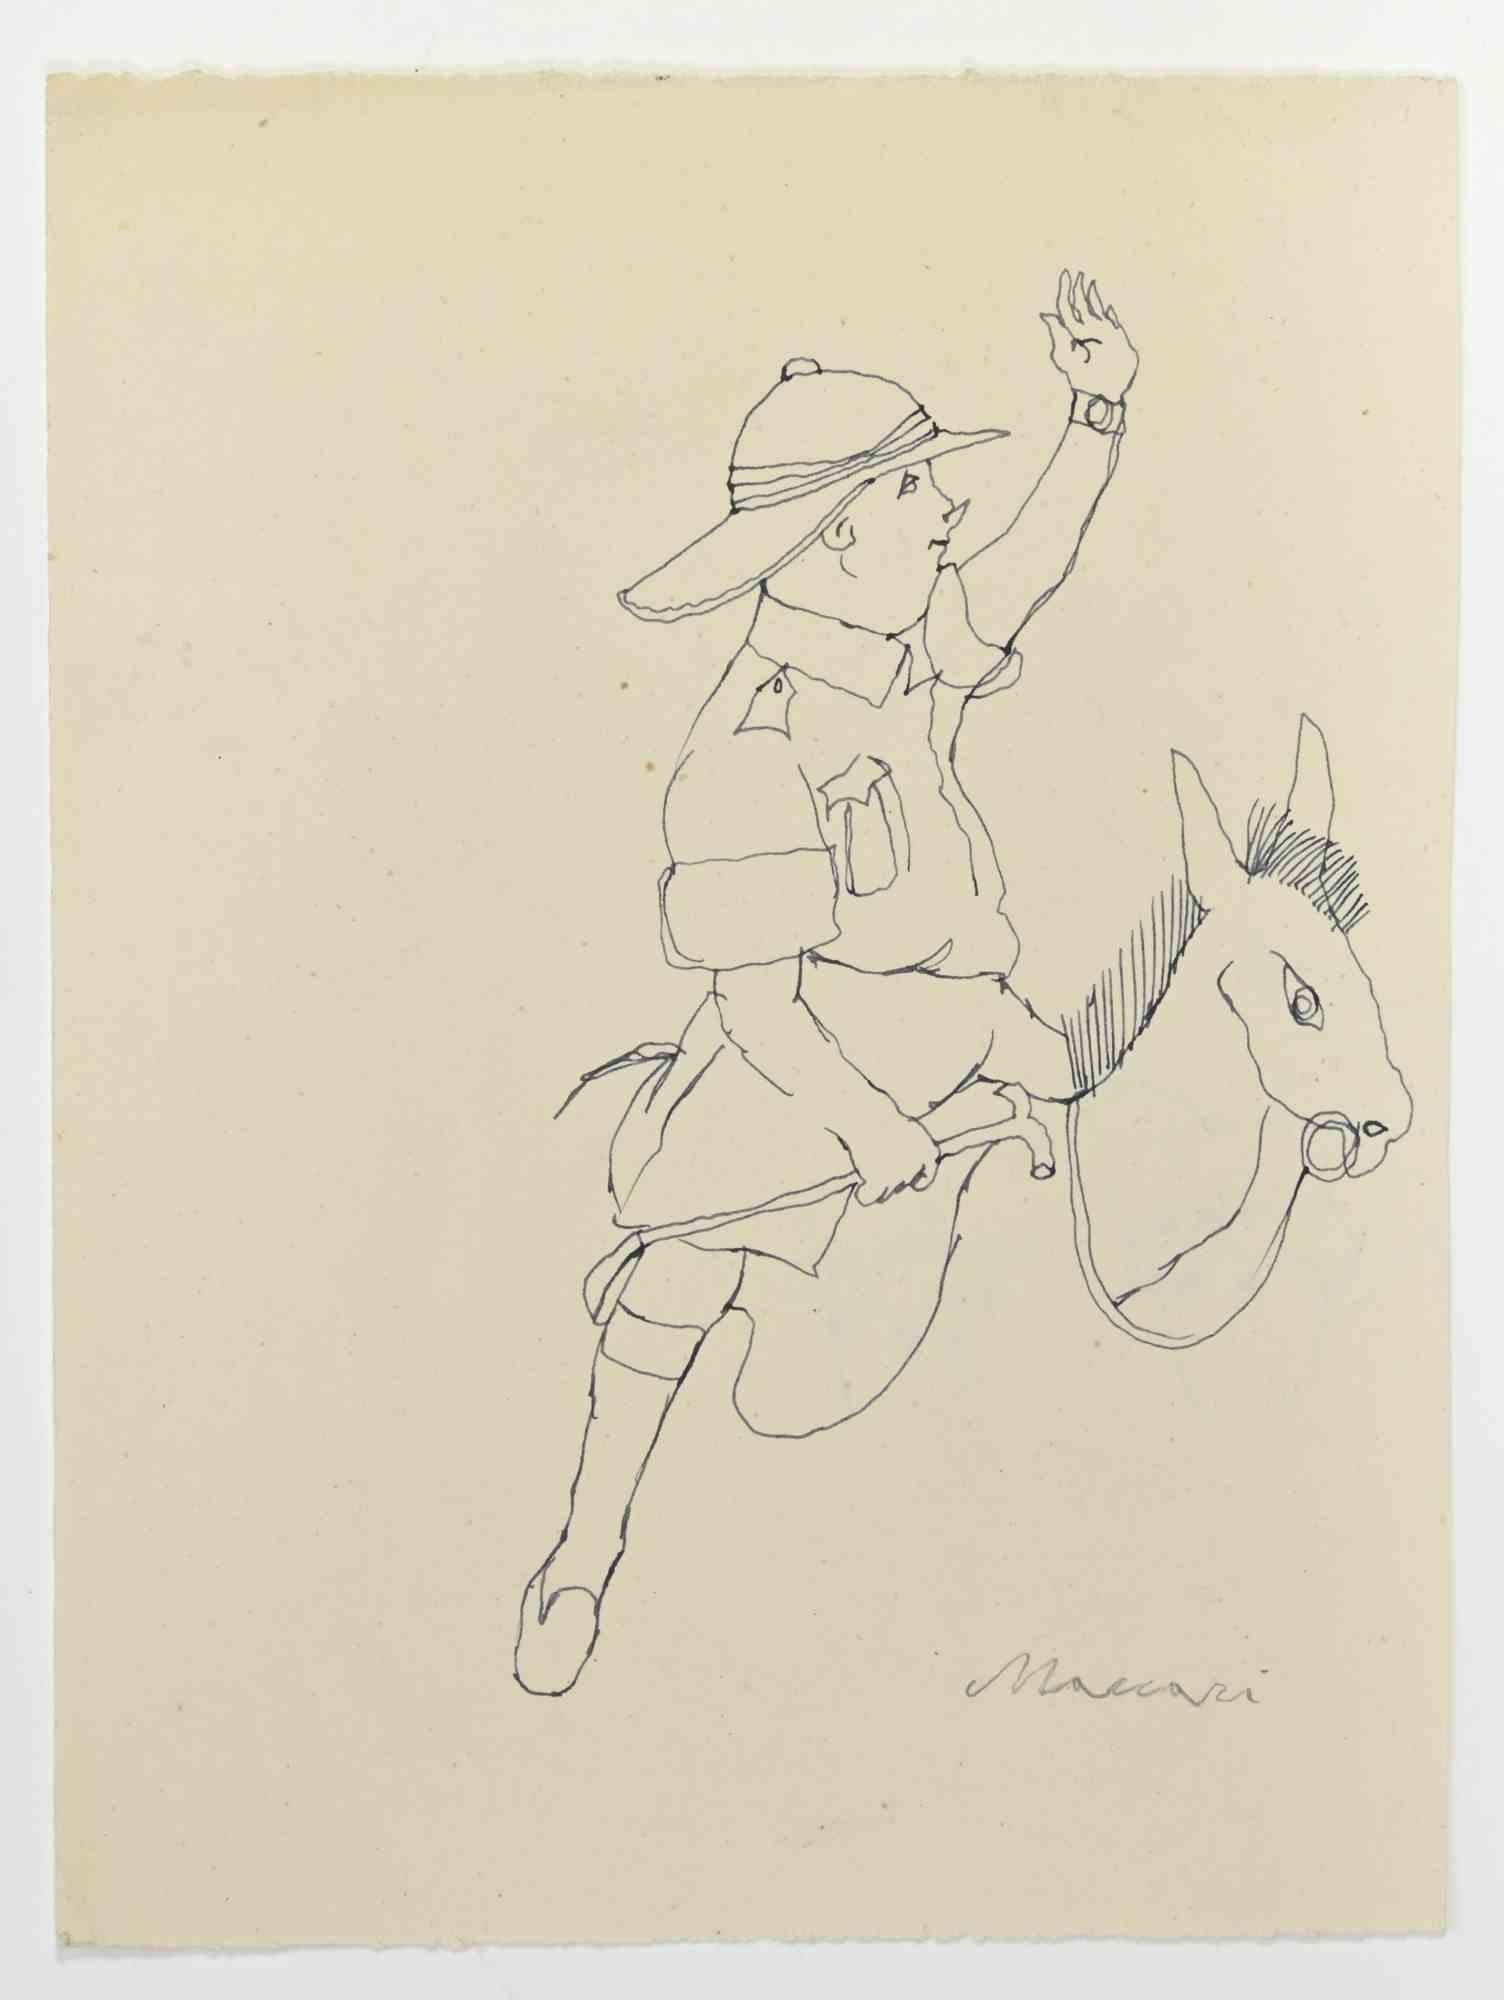 Horseman is a Pen Drawing realized by Mino Maccari  (1924-1989) in the 1960s.

Hand-signed on the lower.

Good condition.

Mino Maccari (Siena, 1924-Rome, June 16, 1989) was an Italian writer, painter, engraver and journalist, winner of the